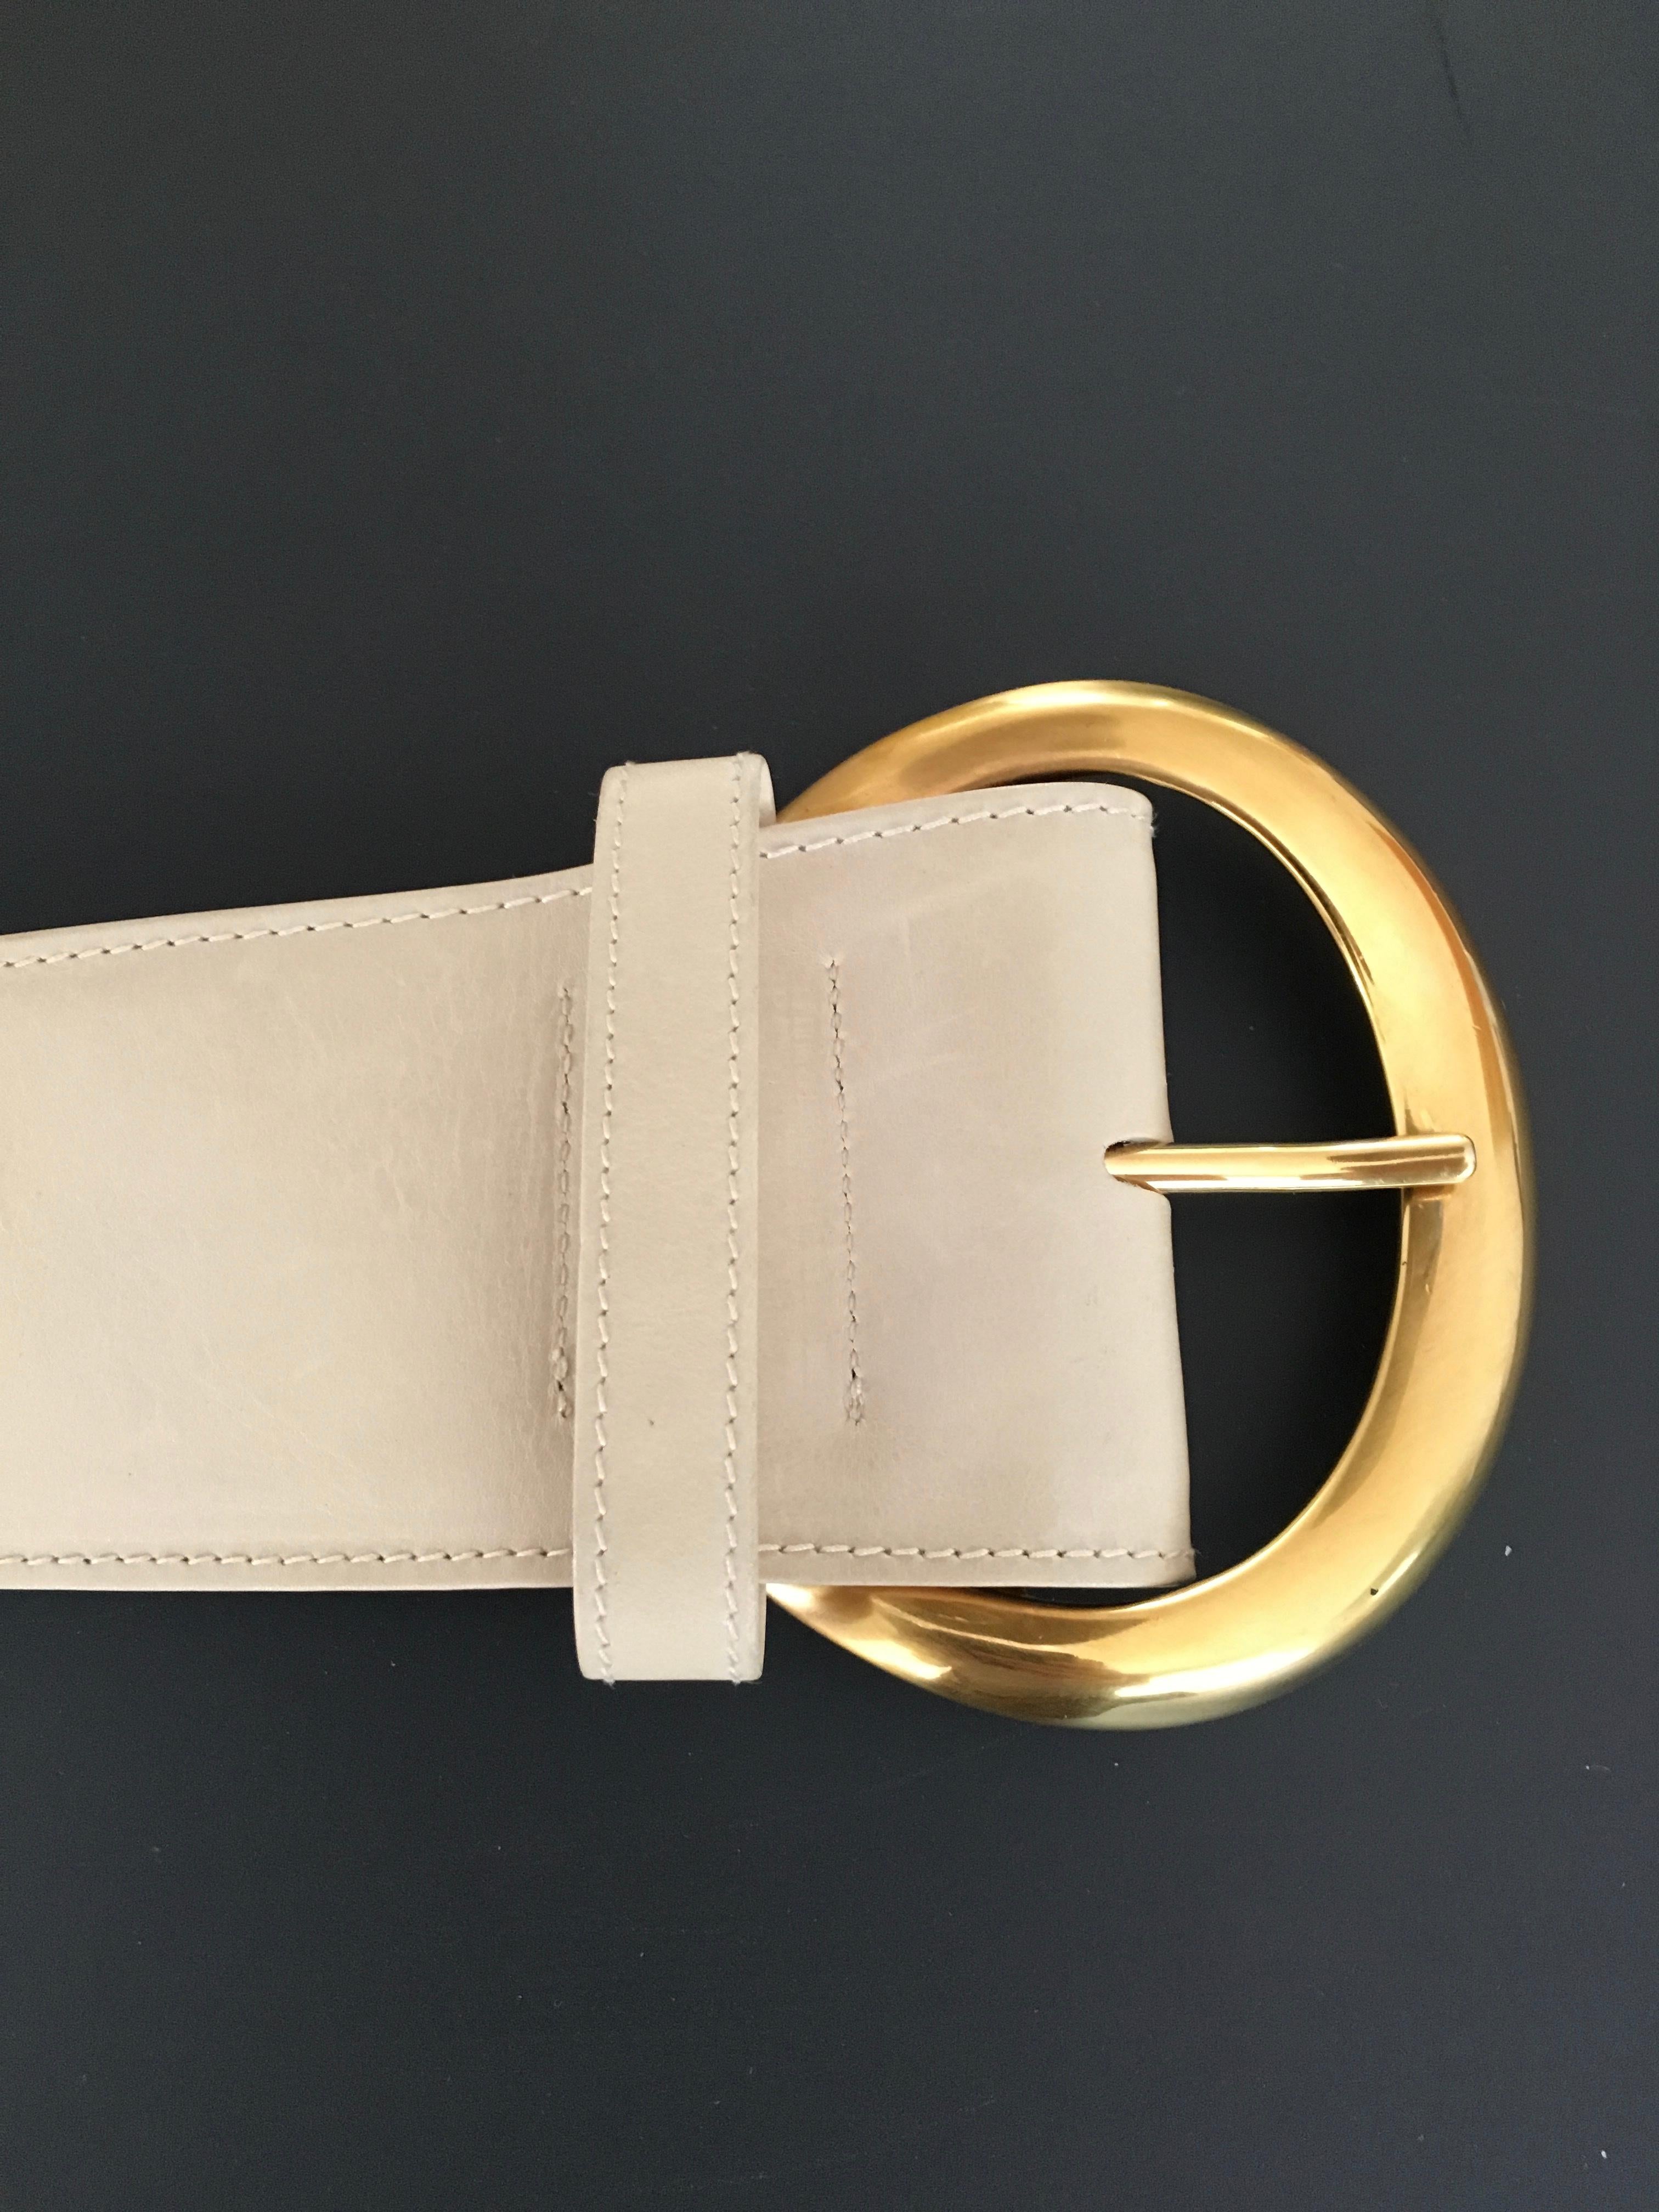 Donna Karan New York 1990s cream wide leather belt with big organic shape brass buckle is a size small.  Made in Italy. This iconic belt by Donna Karan is sophisticated and  always in style. Donna Karan's designs were always so minimal, so clean, so